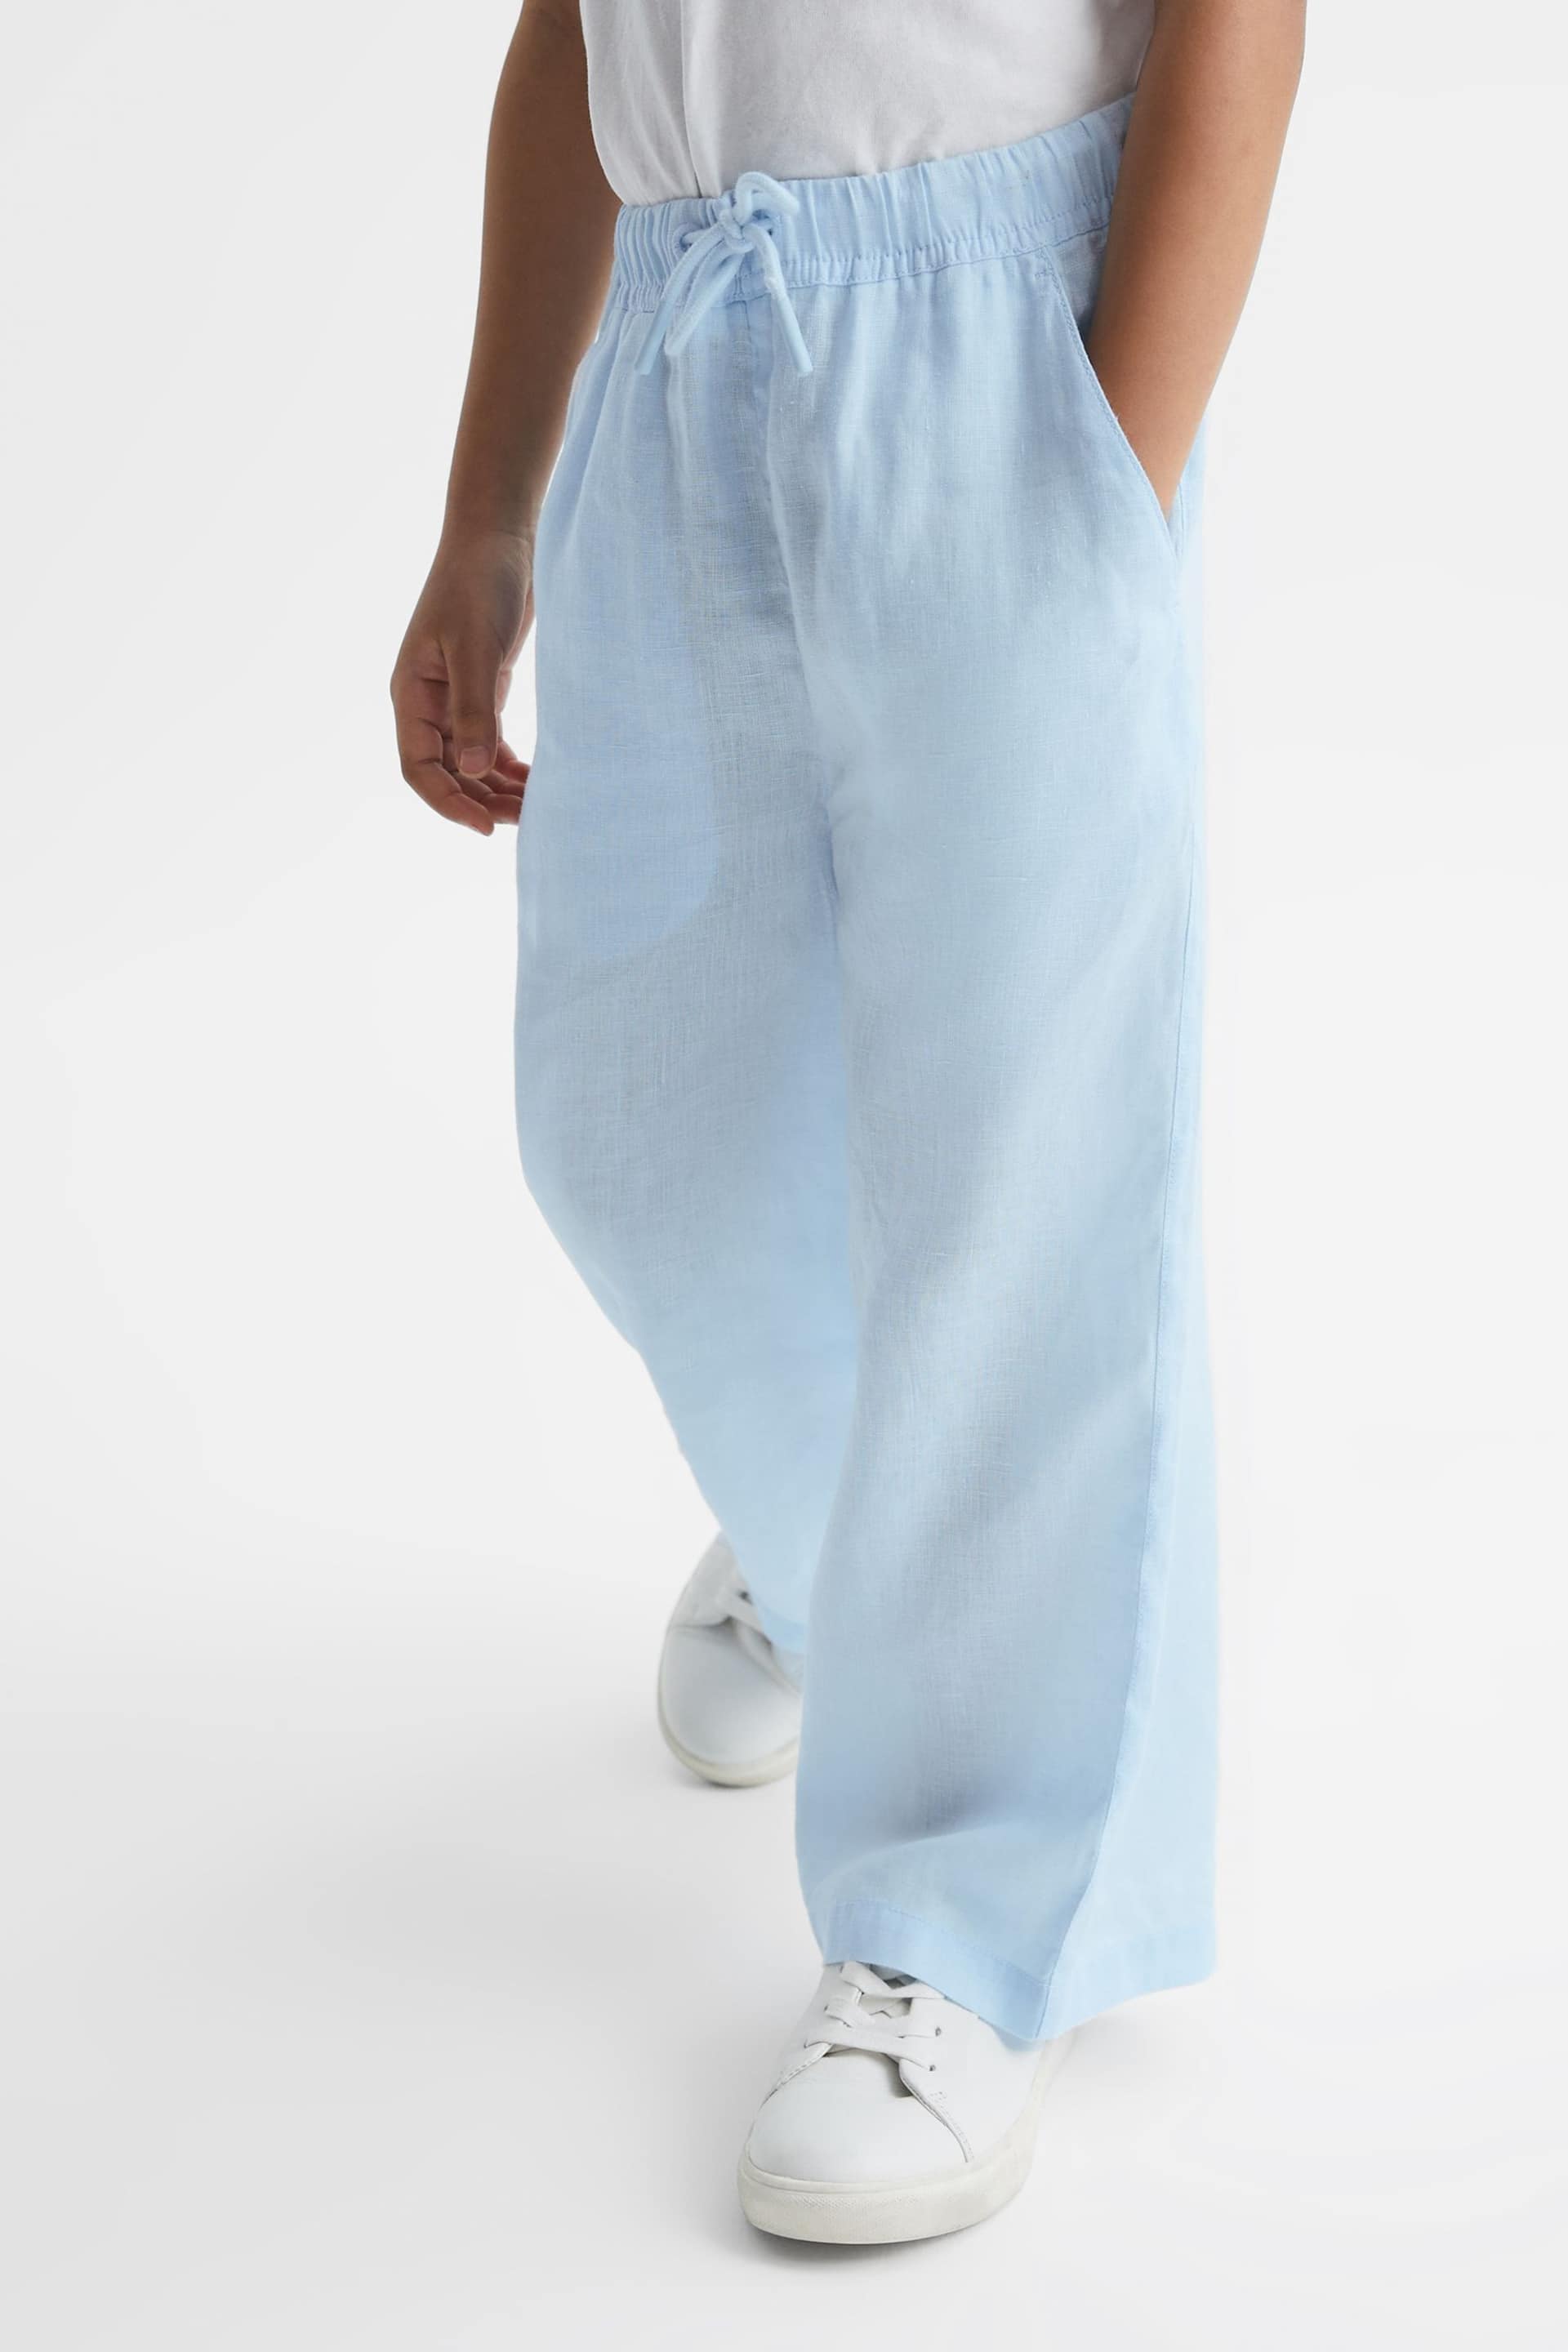 Reiss Ice Blue Cleo Junior Linen Drawstring Trousers - Image 3 of 6